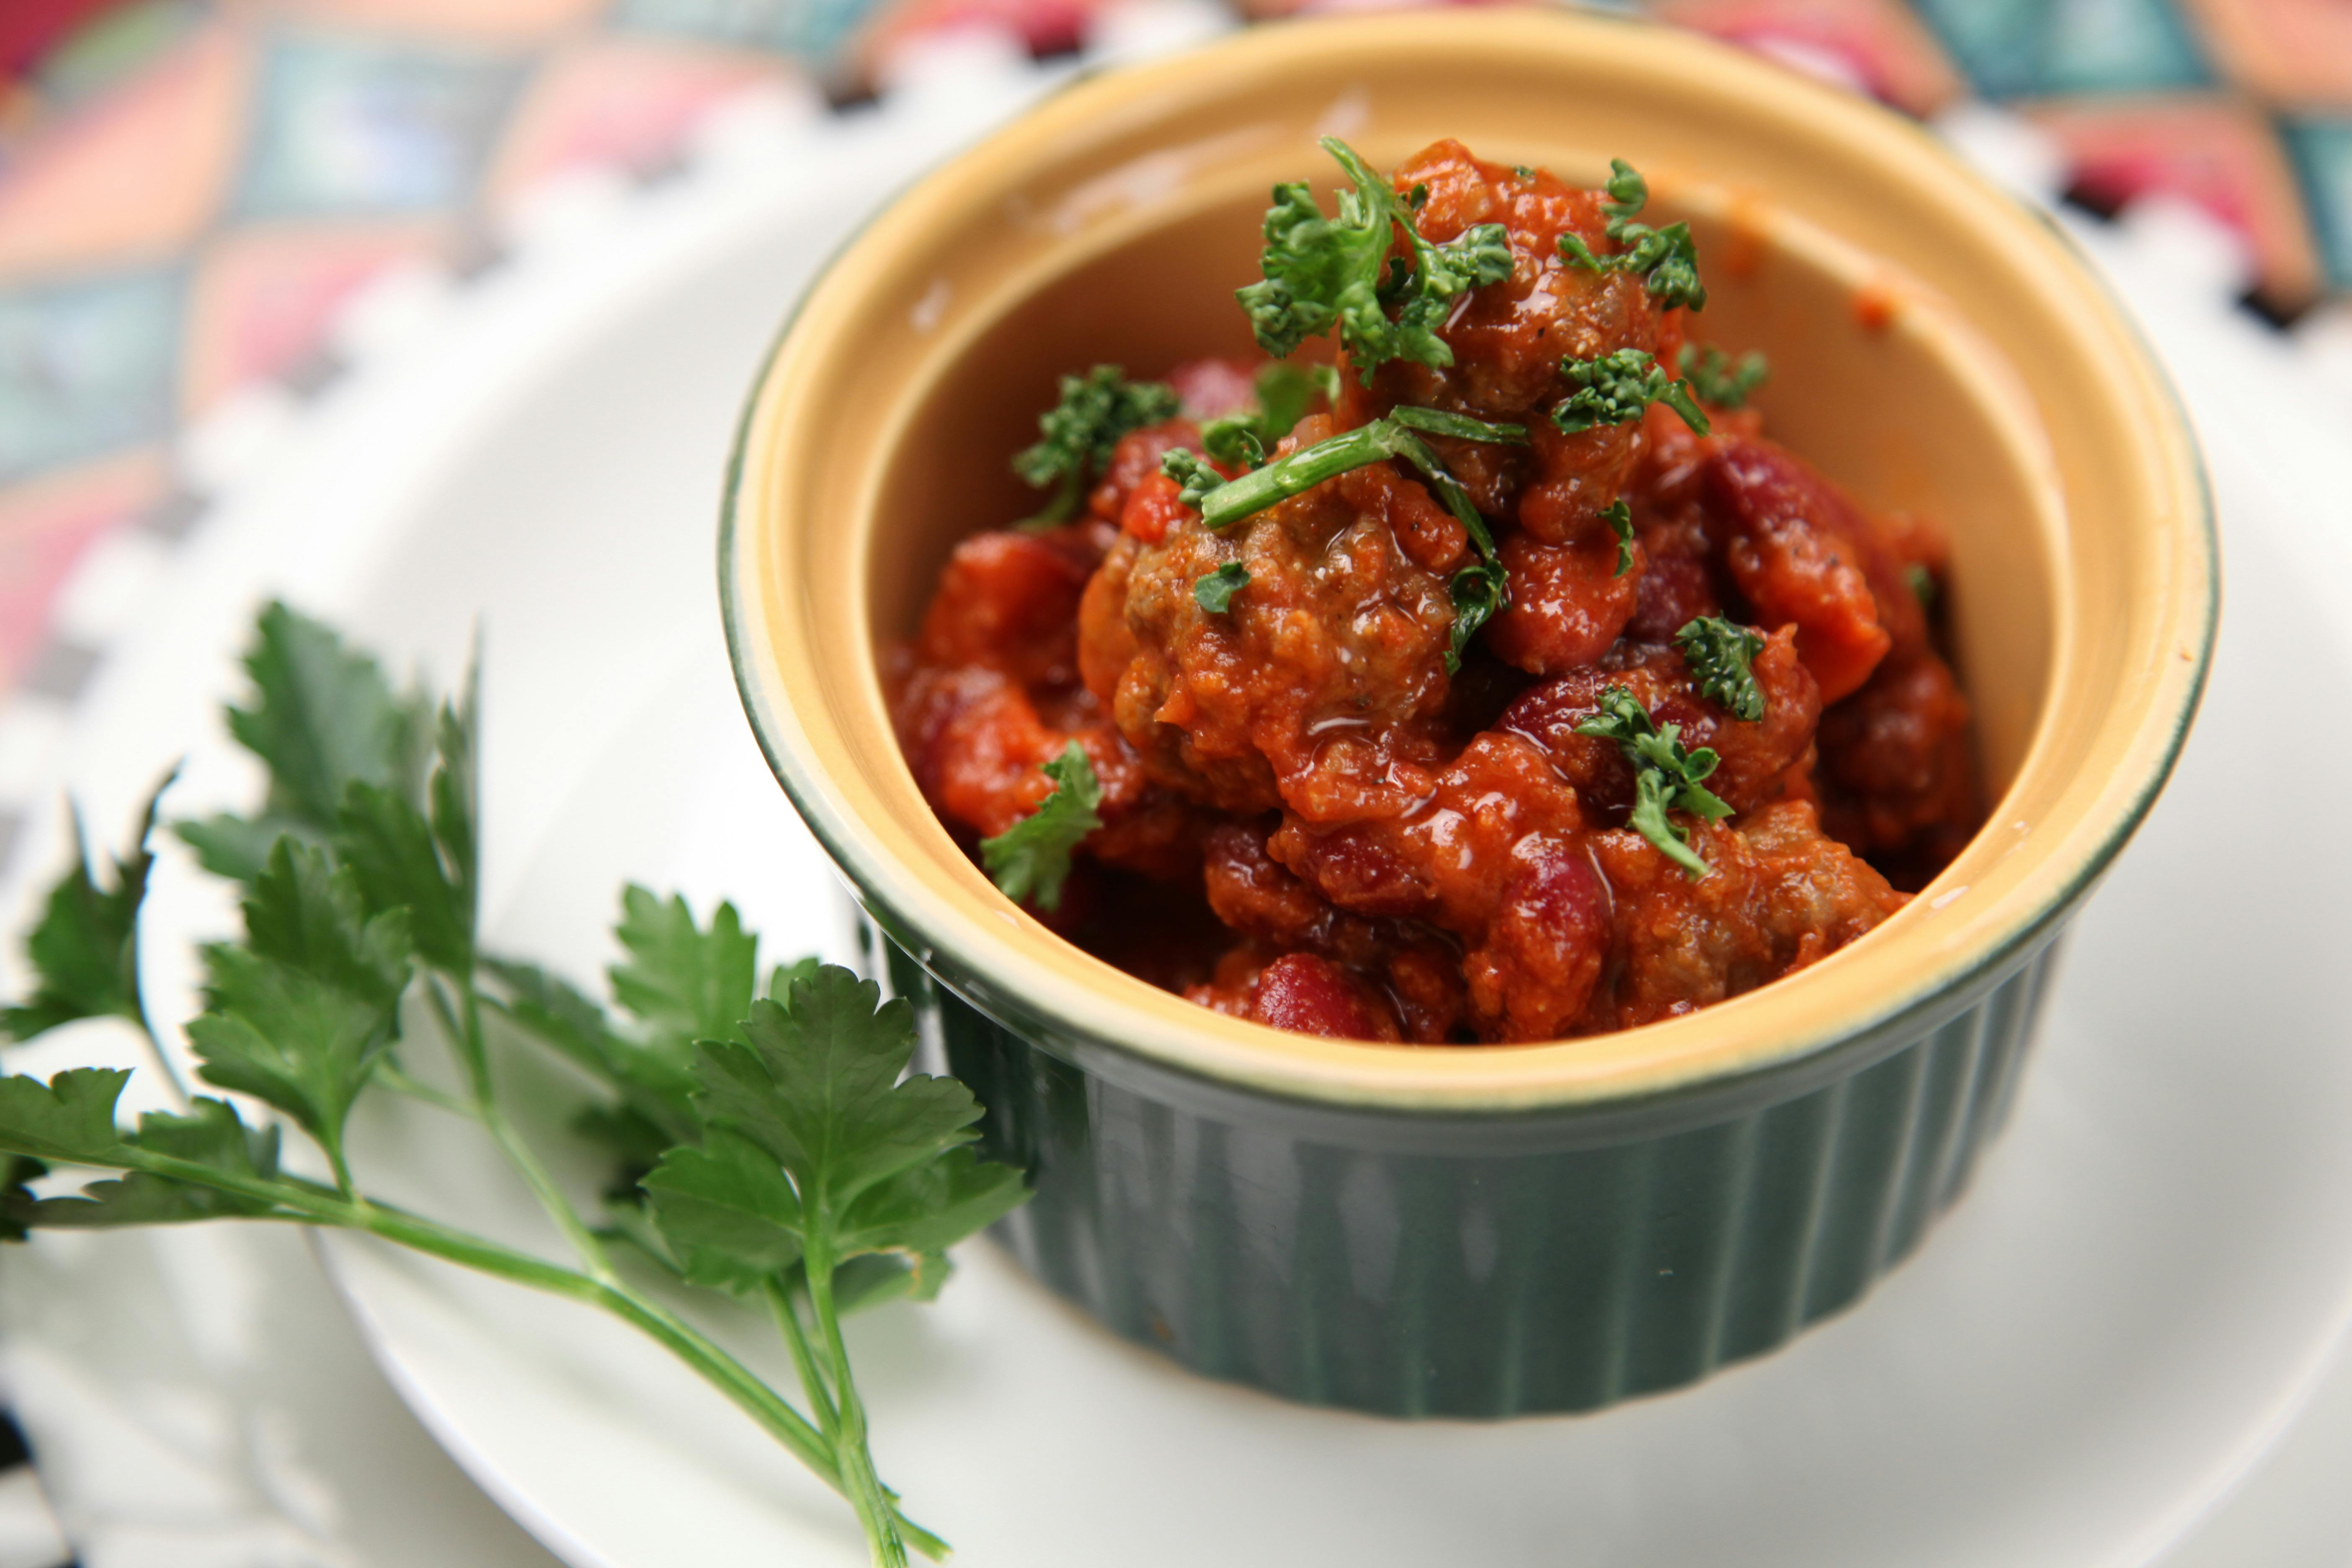 A ramekin filled with chili | Source: Pexels